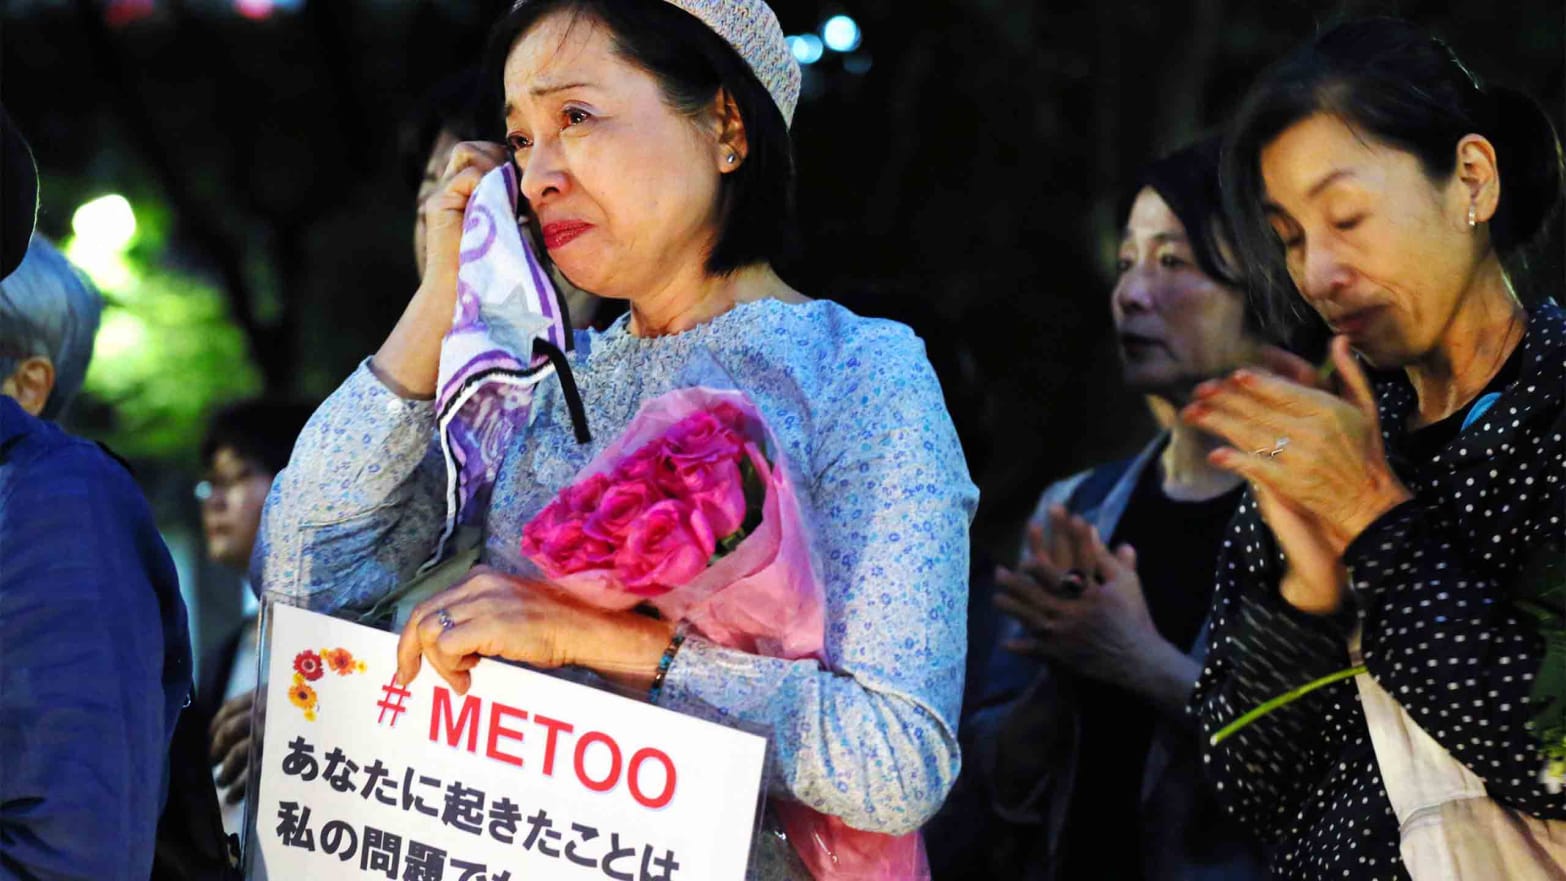 In Japan Rape Cases, 'No' Still Means No Conviction, and Protests Are  Growing